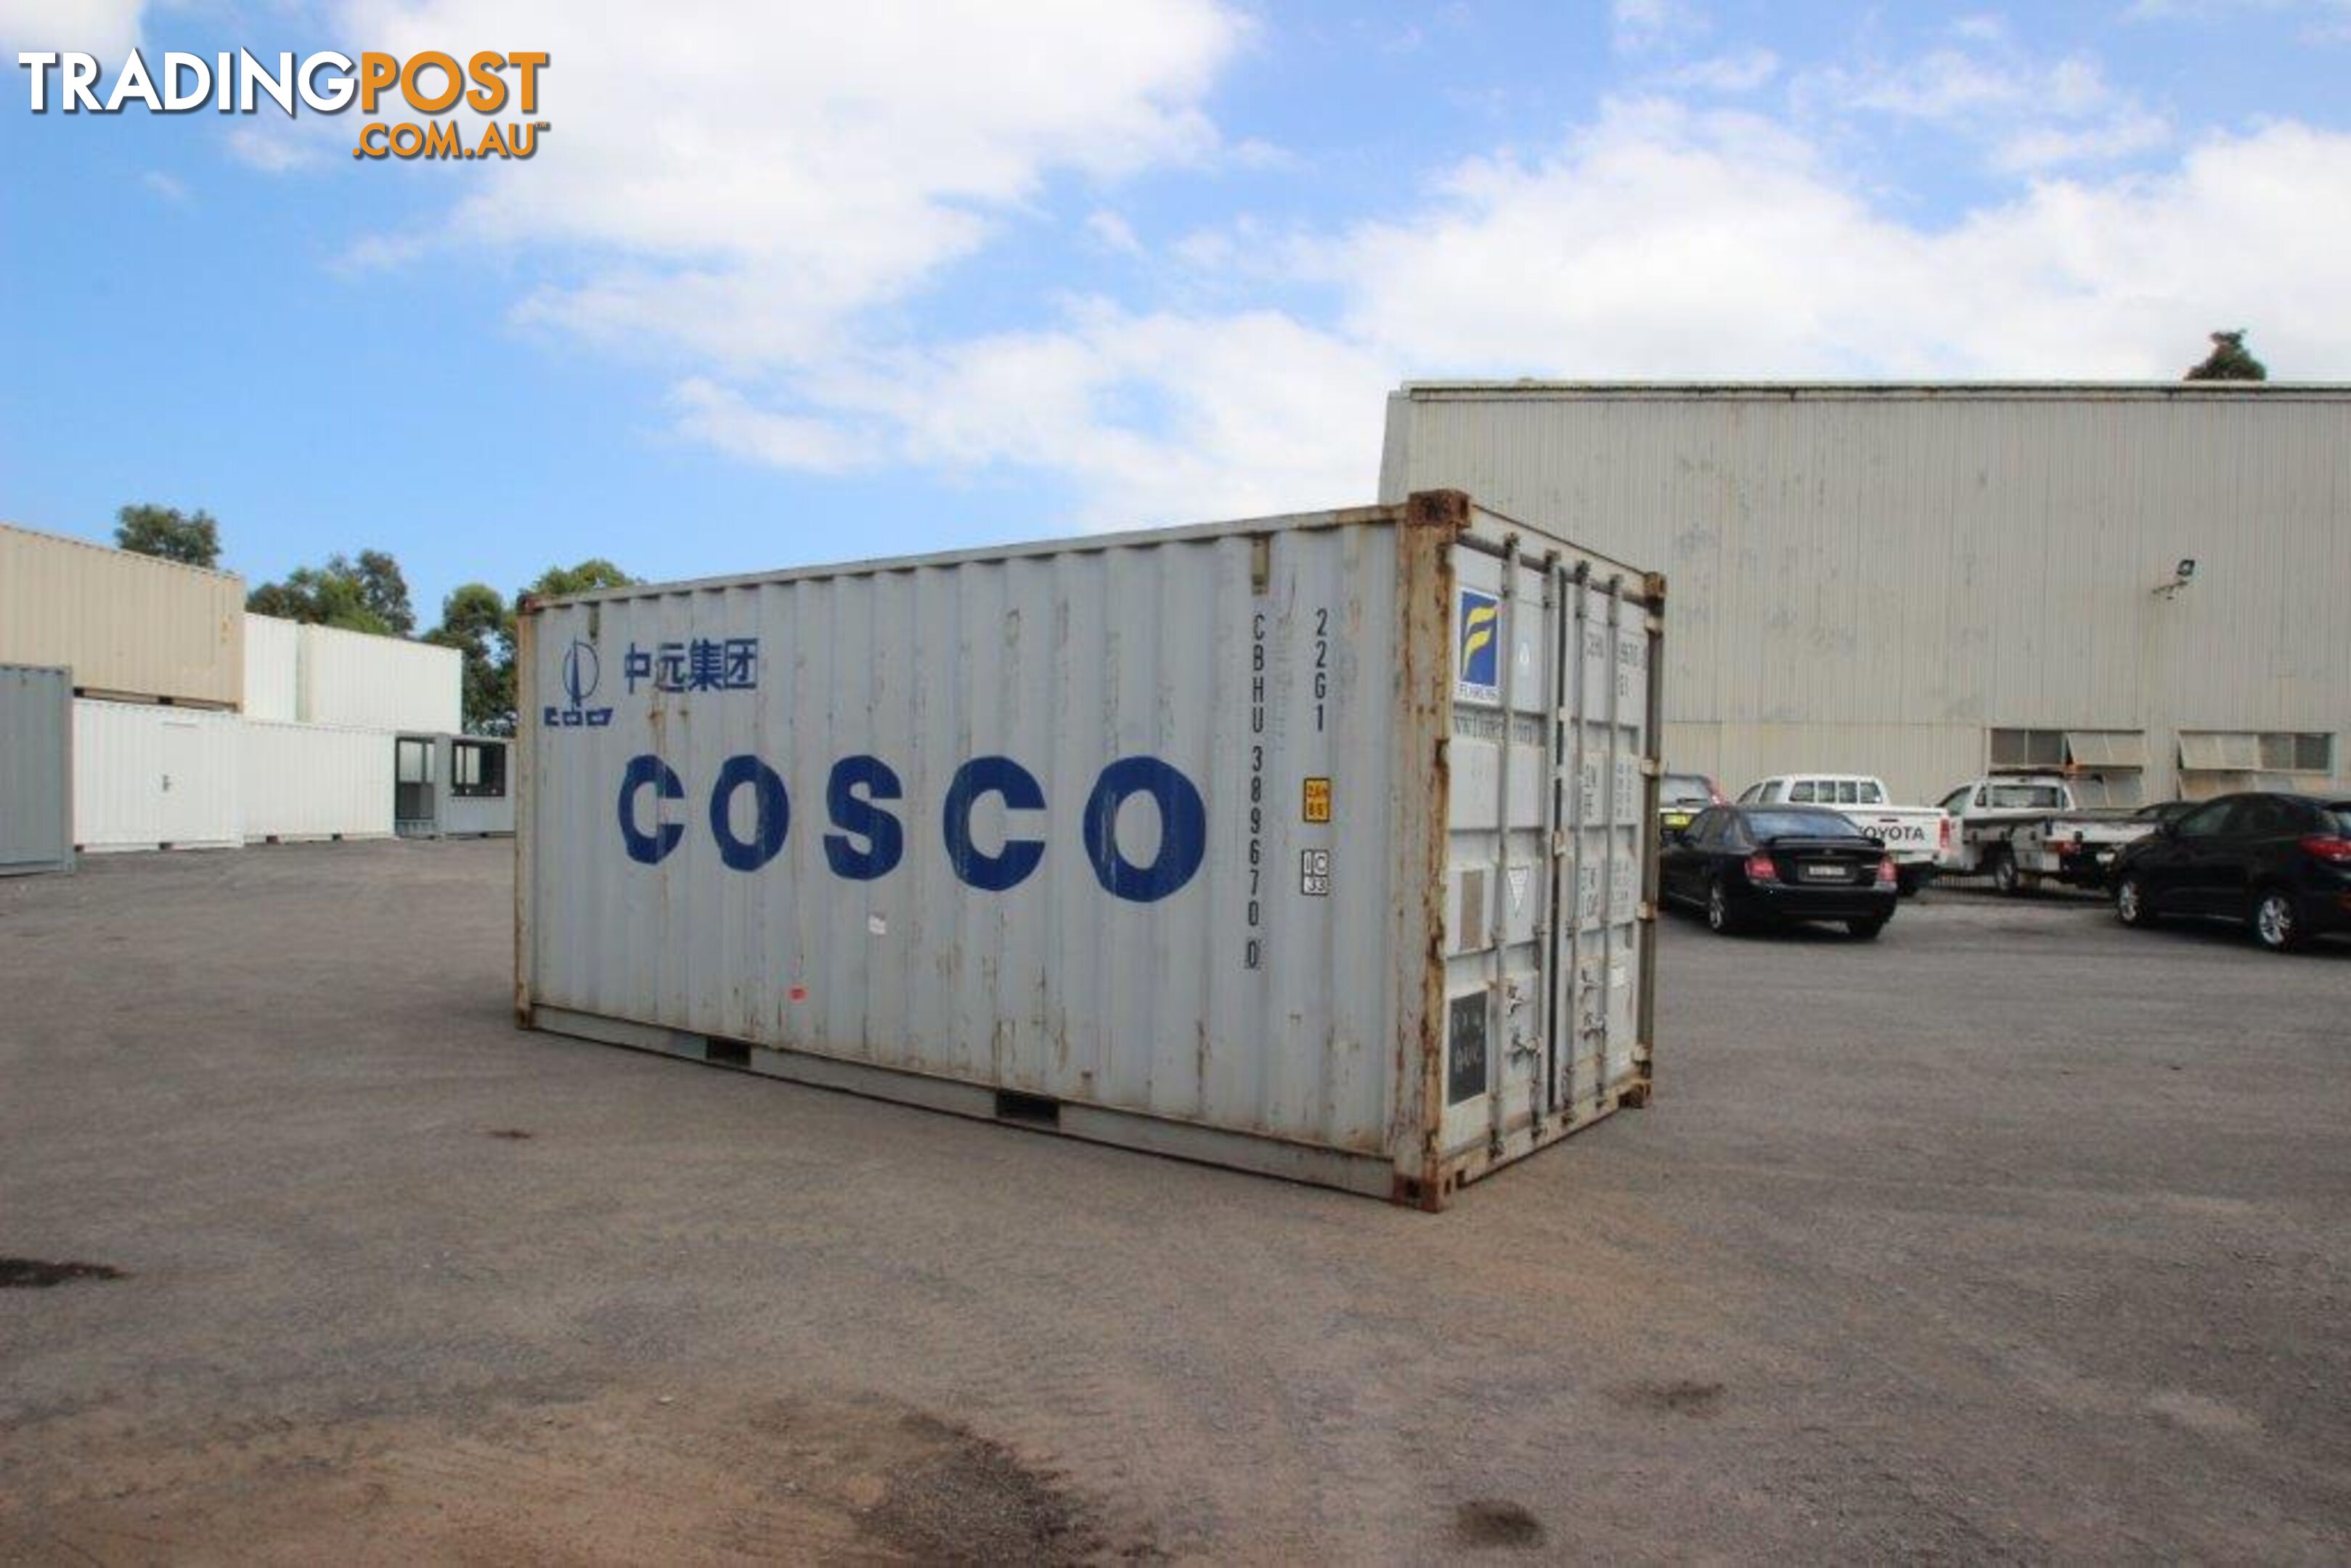 Used 20ft Shipping Containers Port Pirie - From $3500 + GST